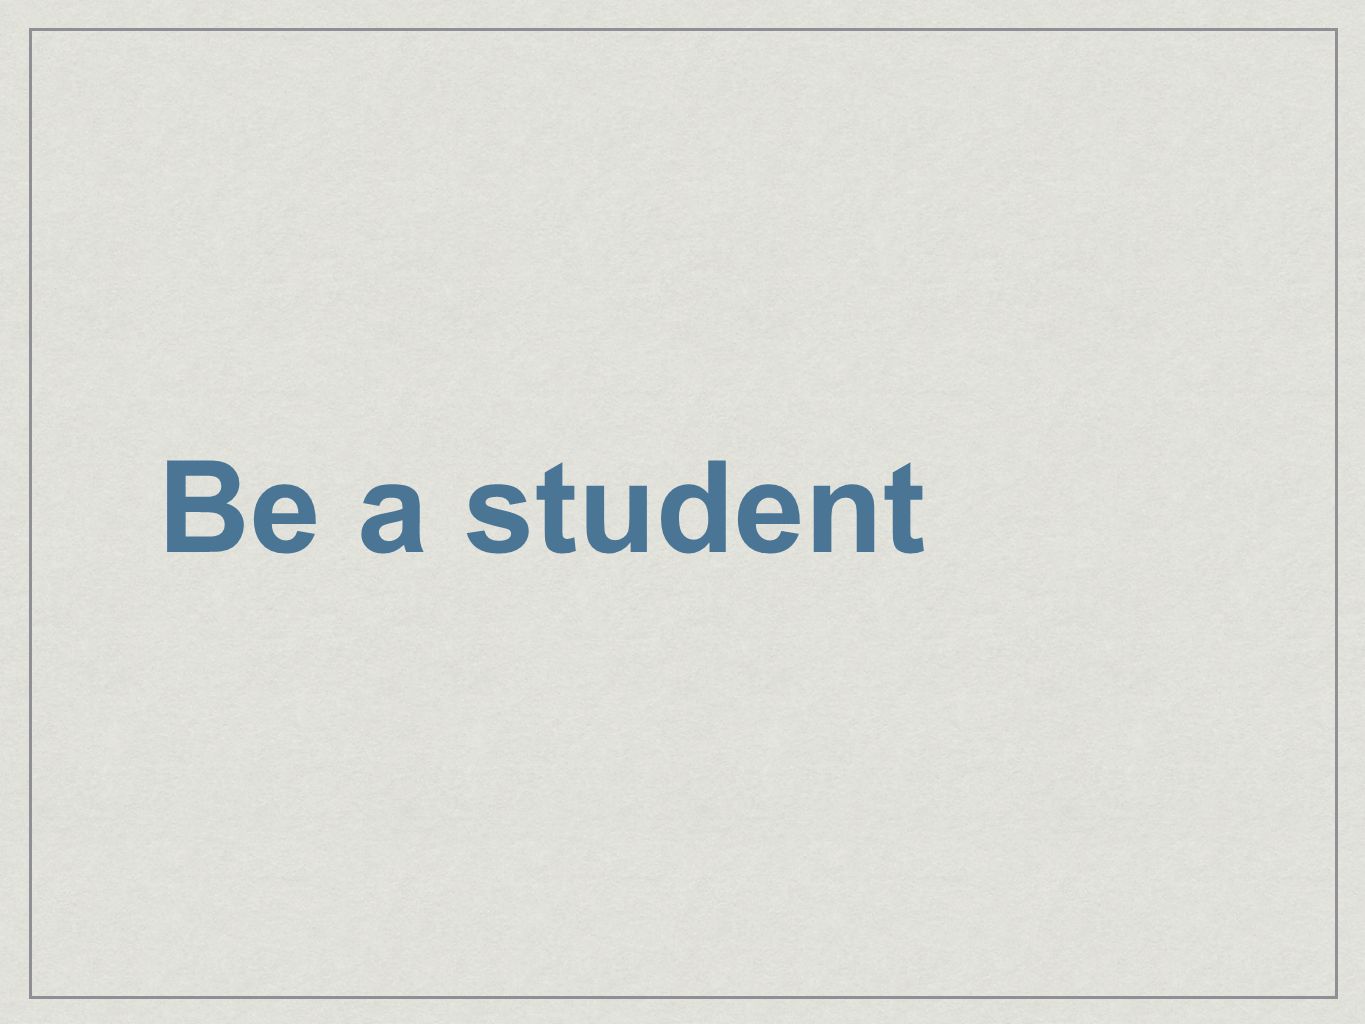 Be a student